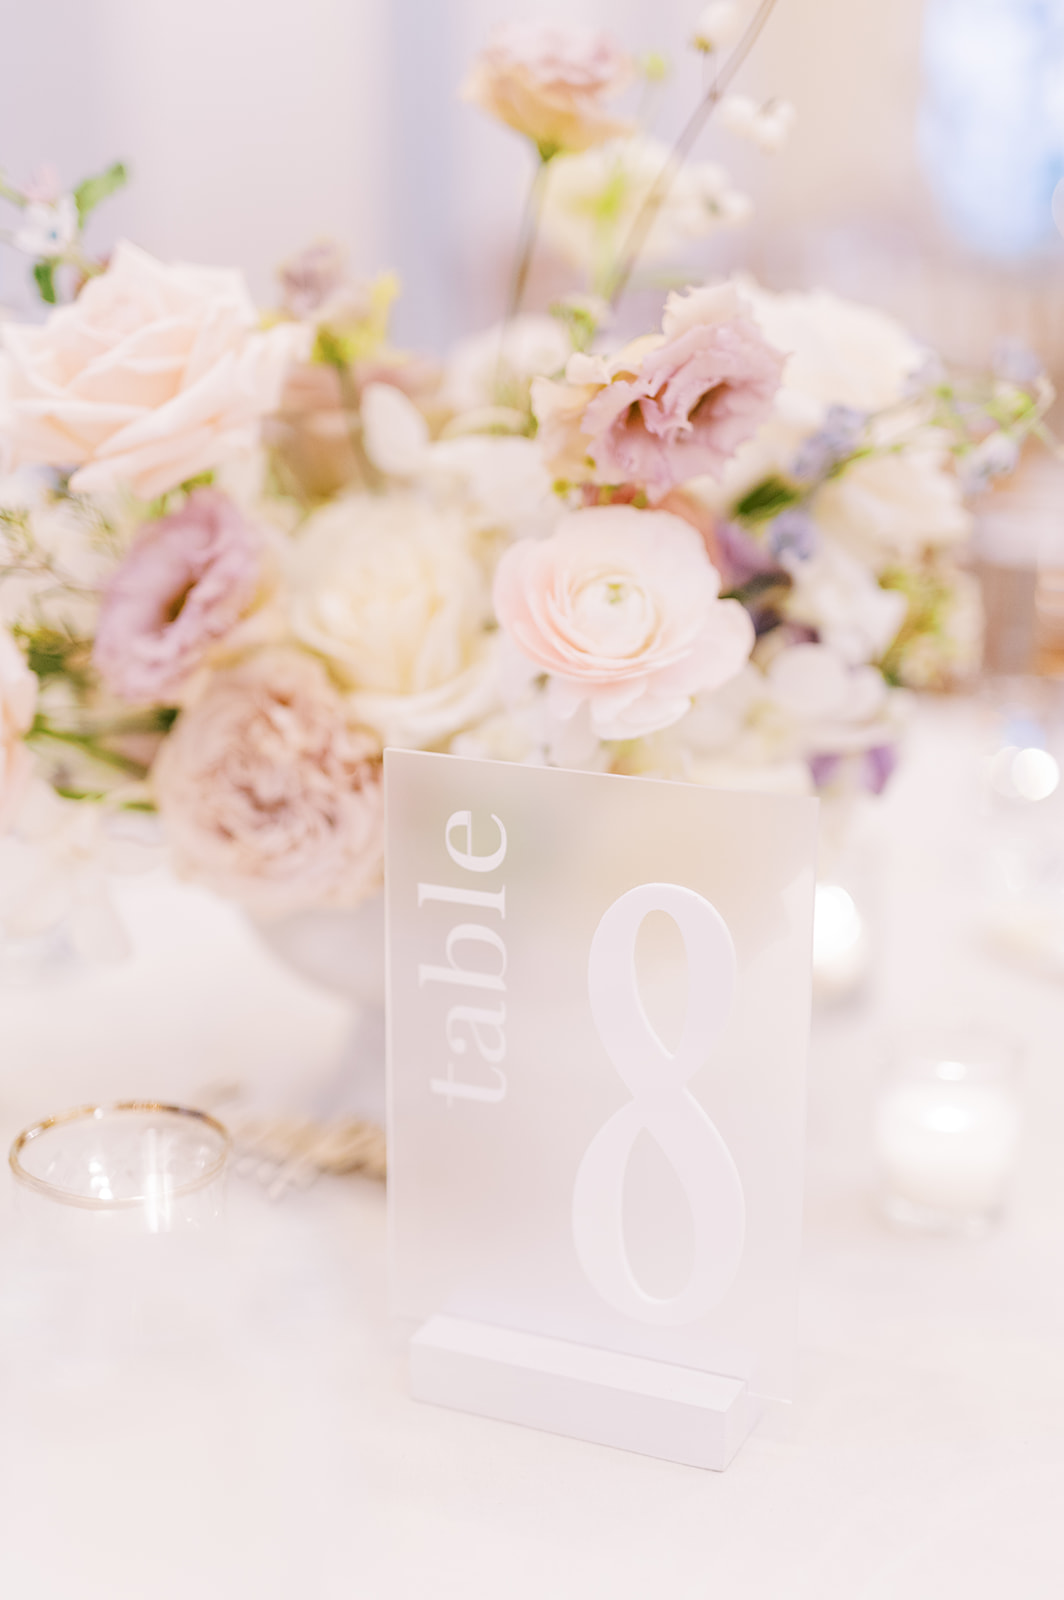 clear frosted acrylic table number with white lettering in front of neutral monochromatic floral centerpiece for wedding